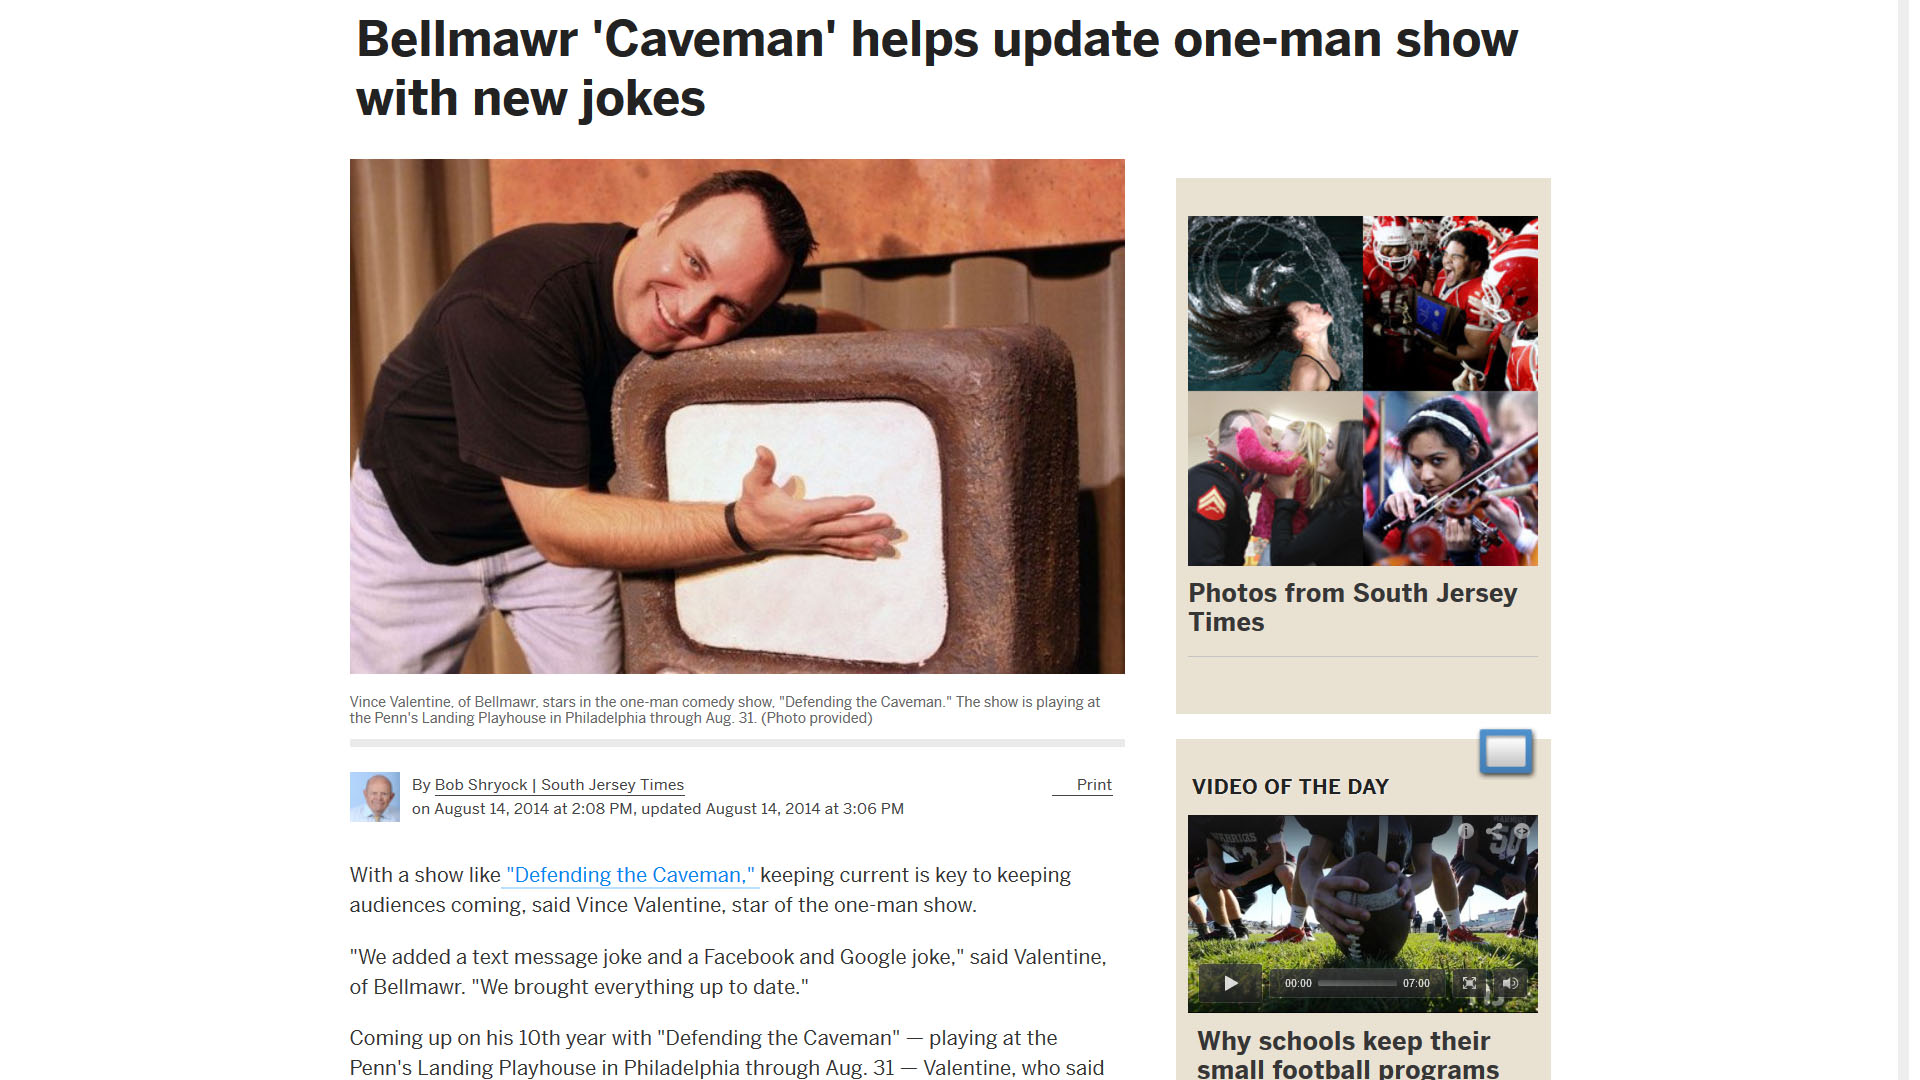 Bellmawr 'Caveman' helps update one-man show with new jokes